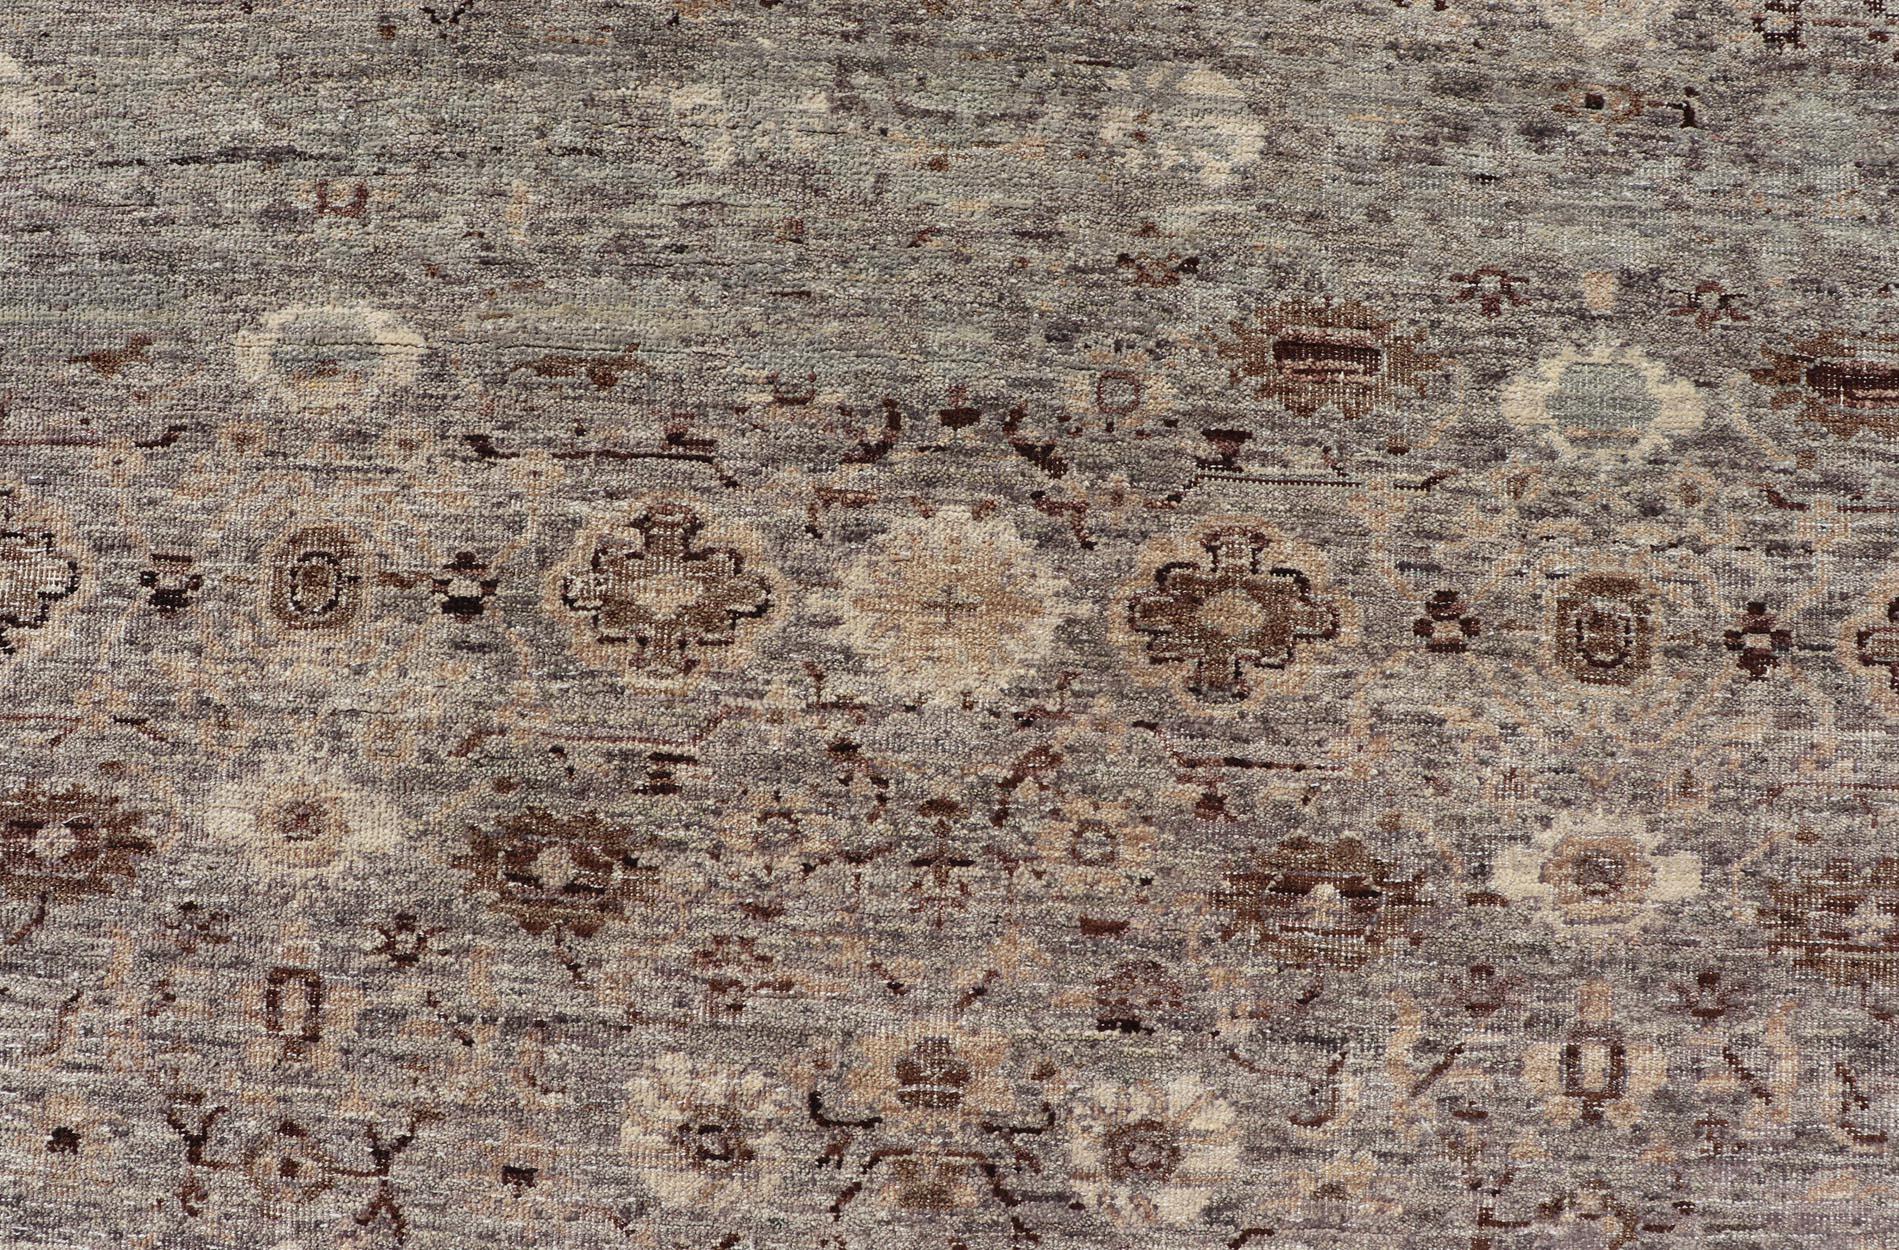 Modern Oushak Rug with Floral Pattern in Gray, Brown Tones and Neutral Colors. Keivan Woven Arts, rug PUR-14218, country of origin / type: India / Oushak. 
Measures: 8'0 x 10'0 
The all-over fine eave flourishing garden pattern of this unique modern